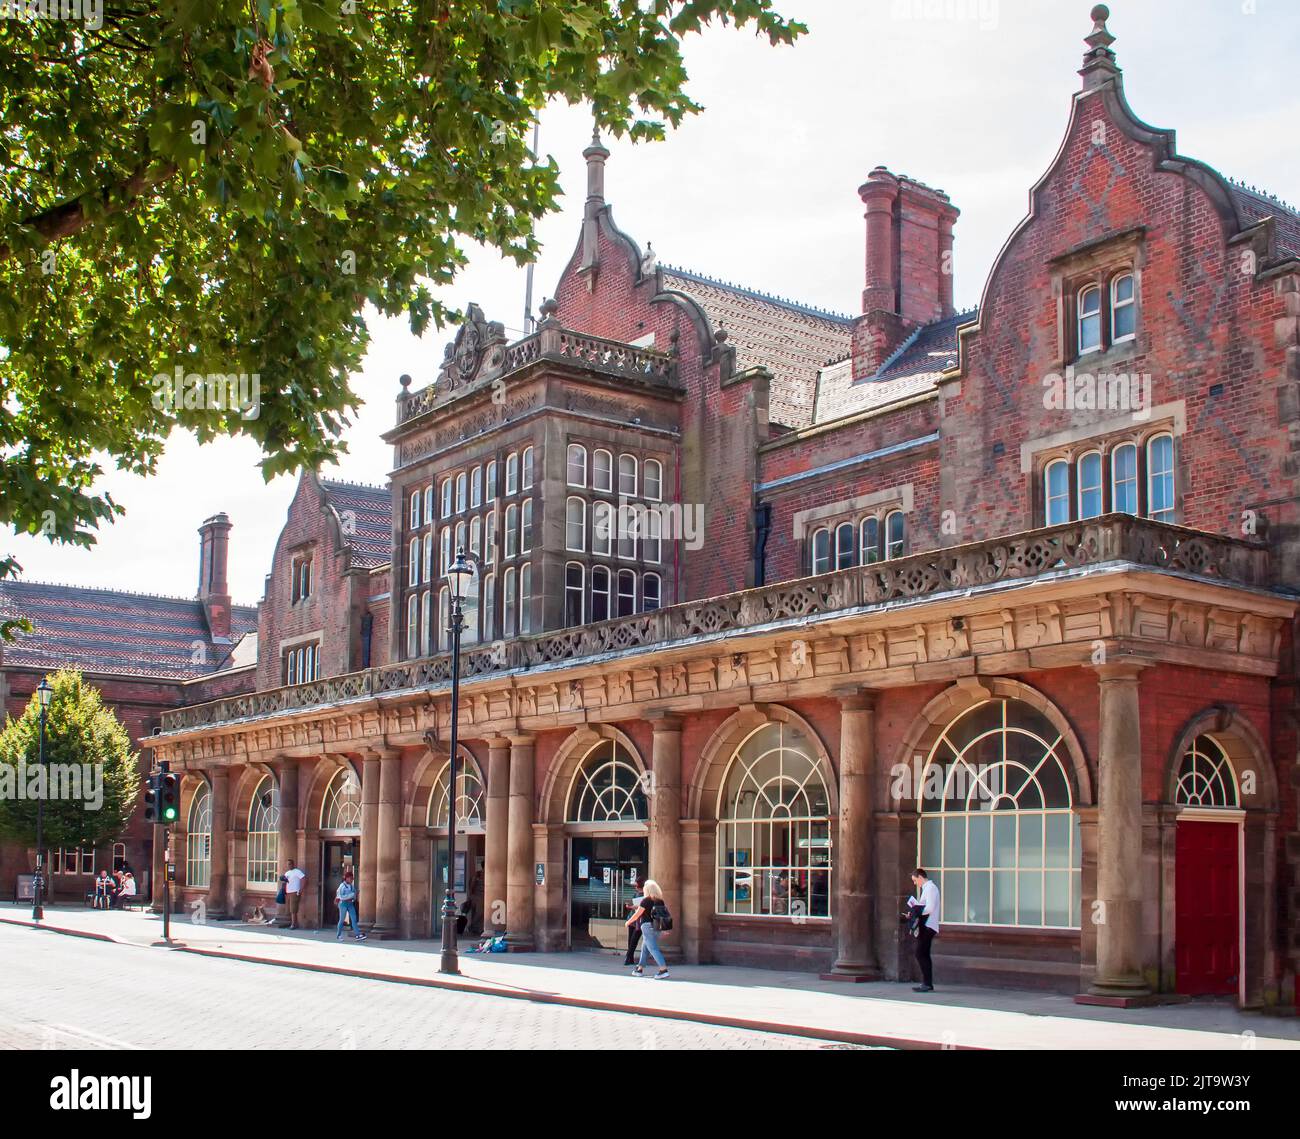 The impressive frontage of the historic railway station at Stoke-on-Trent, with people in close proximity. Stock Photo